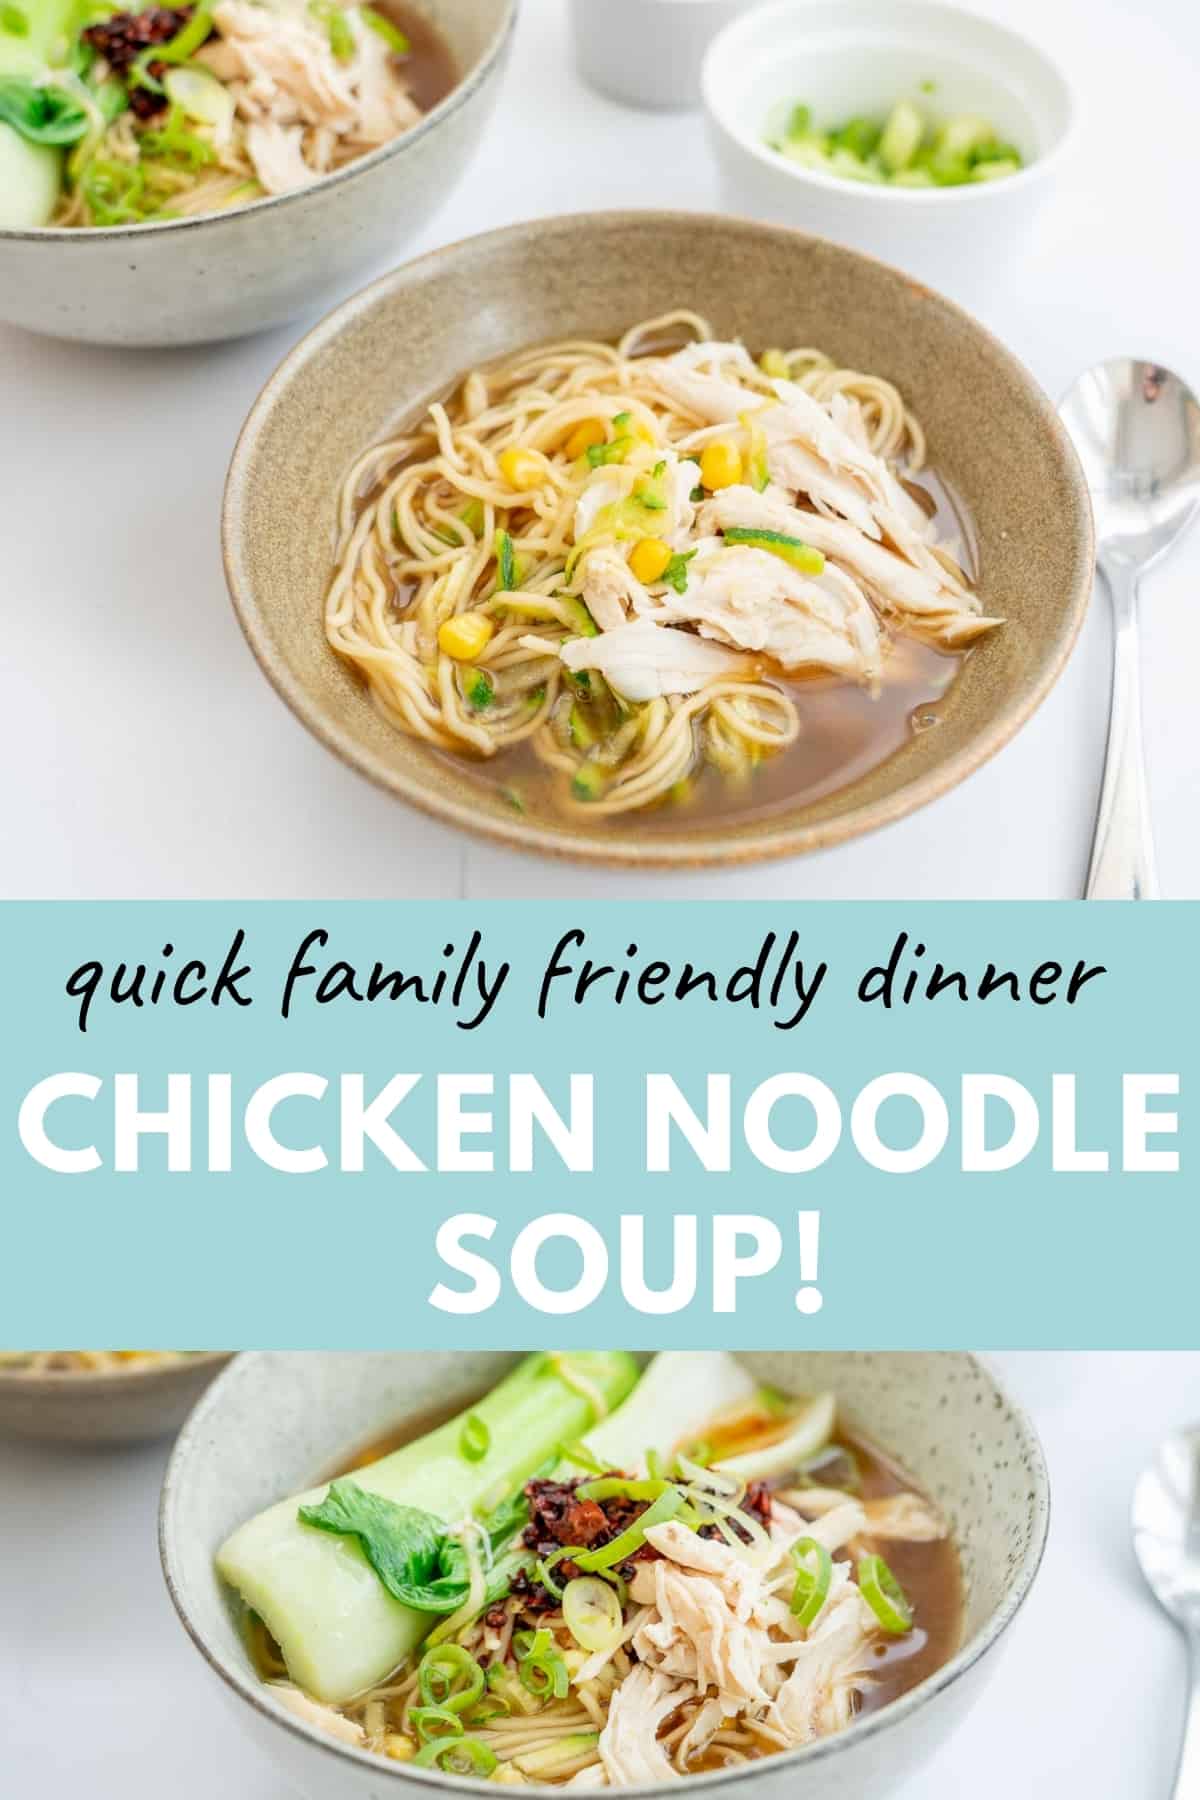 Asian Chicken Noodle Soup - My Kids Lick The Bowl